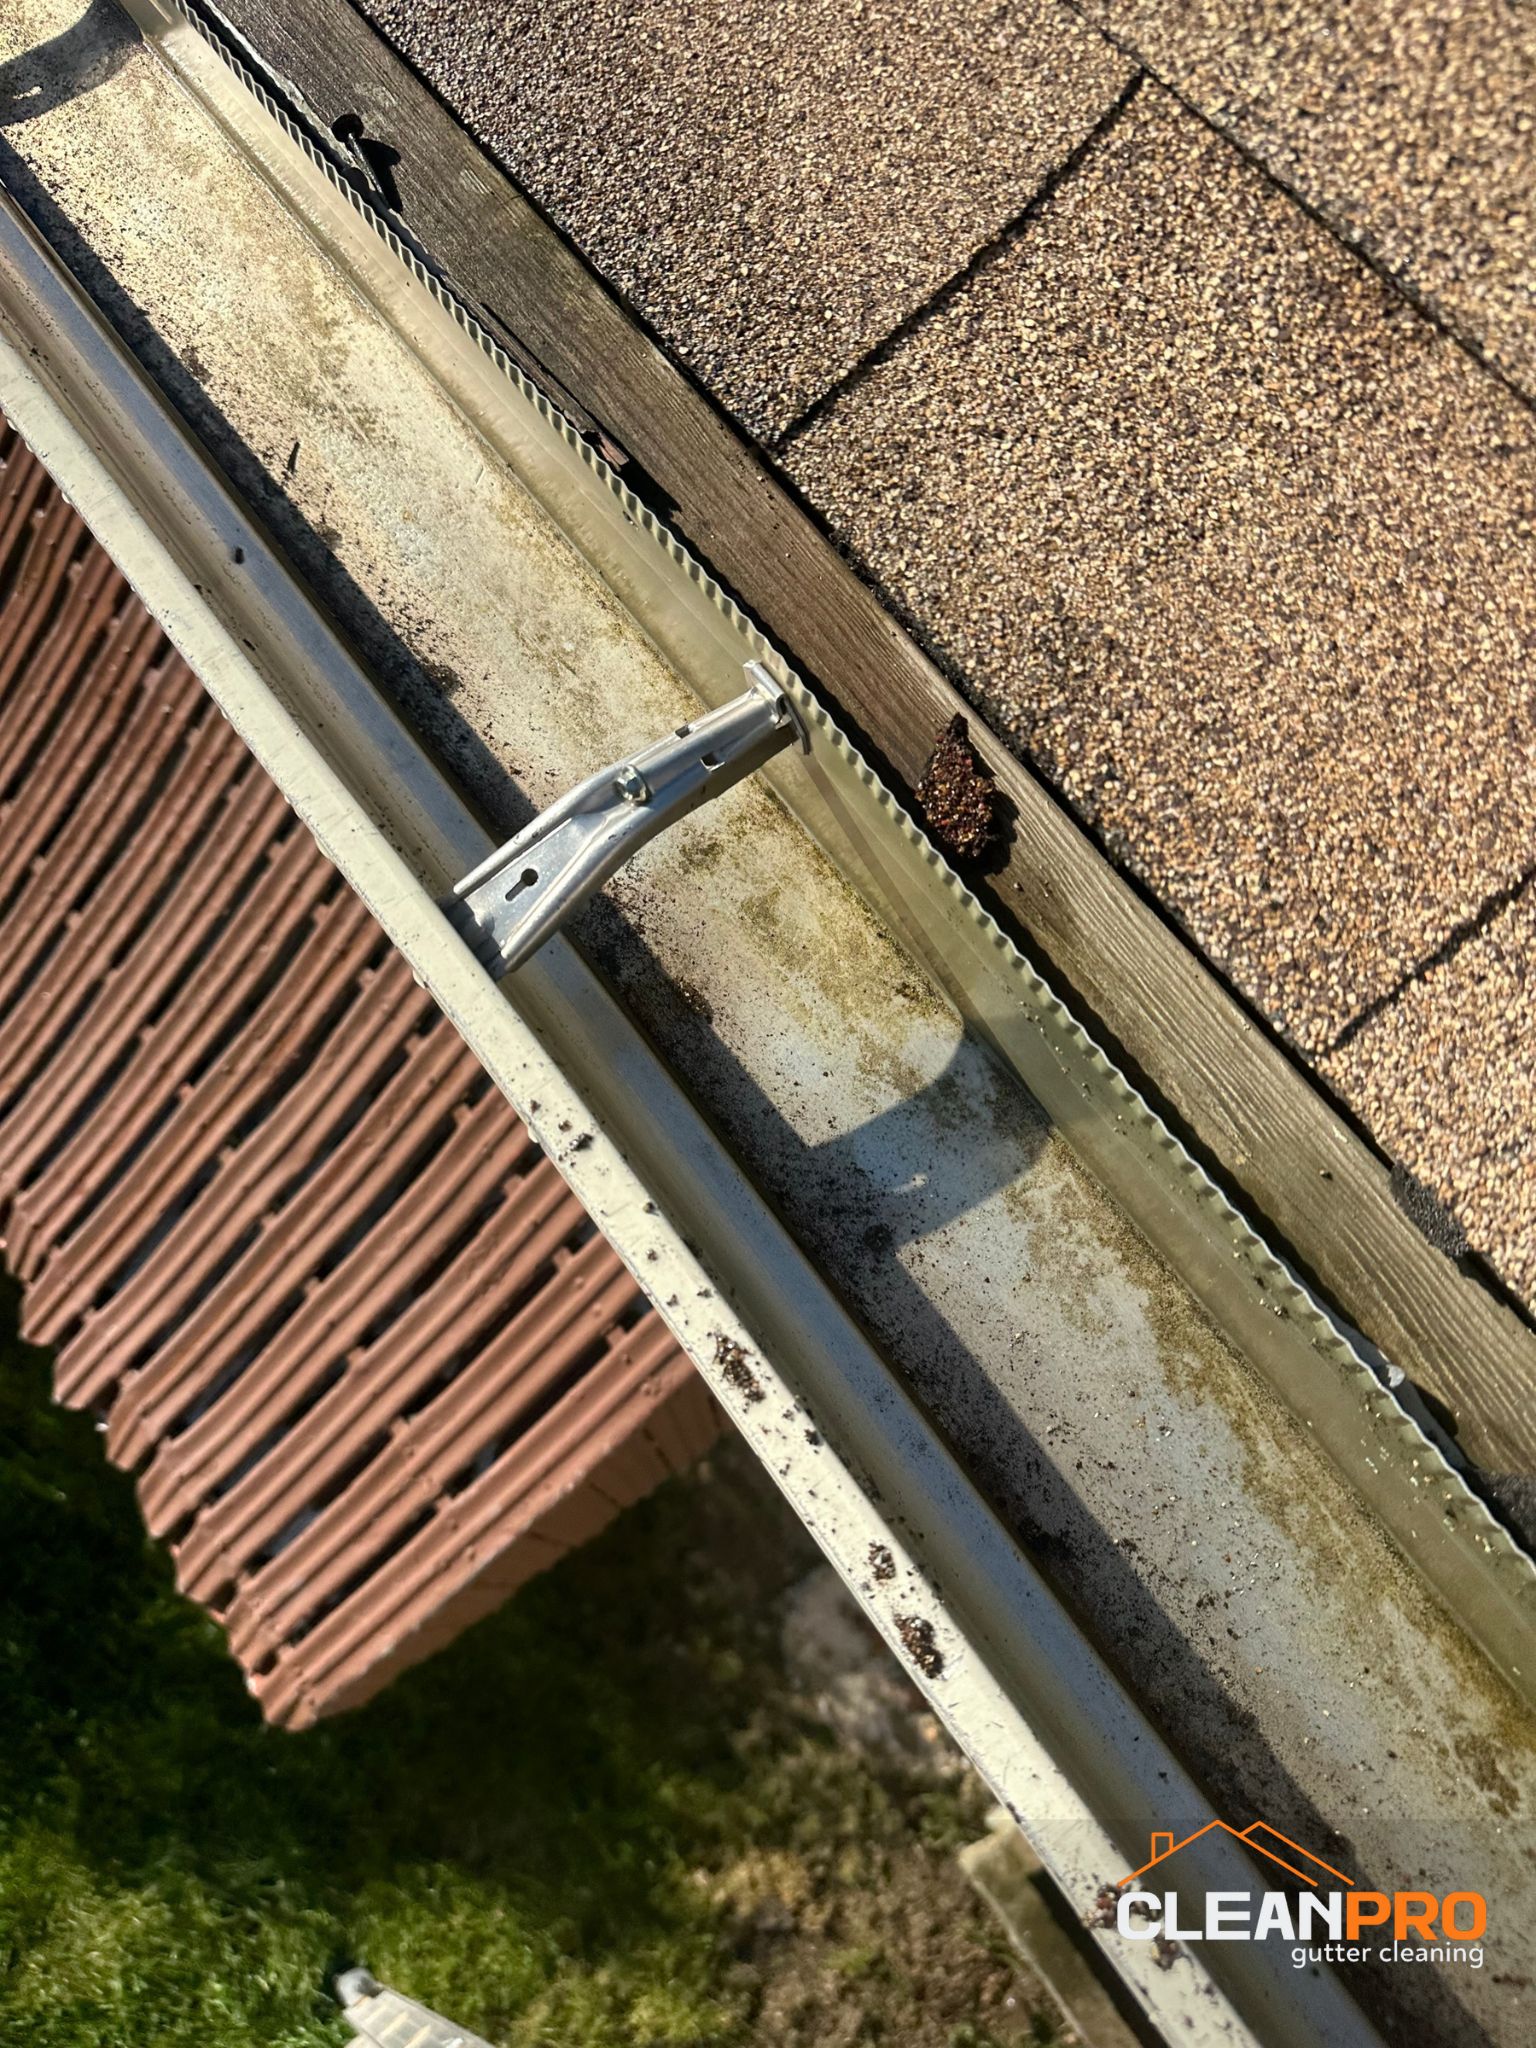 Best Gutter Cleaning Service in Indianapolis